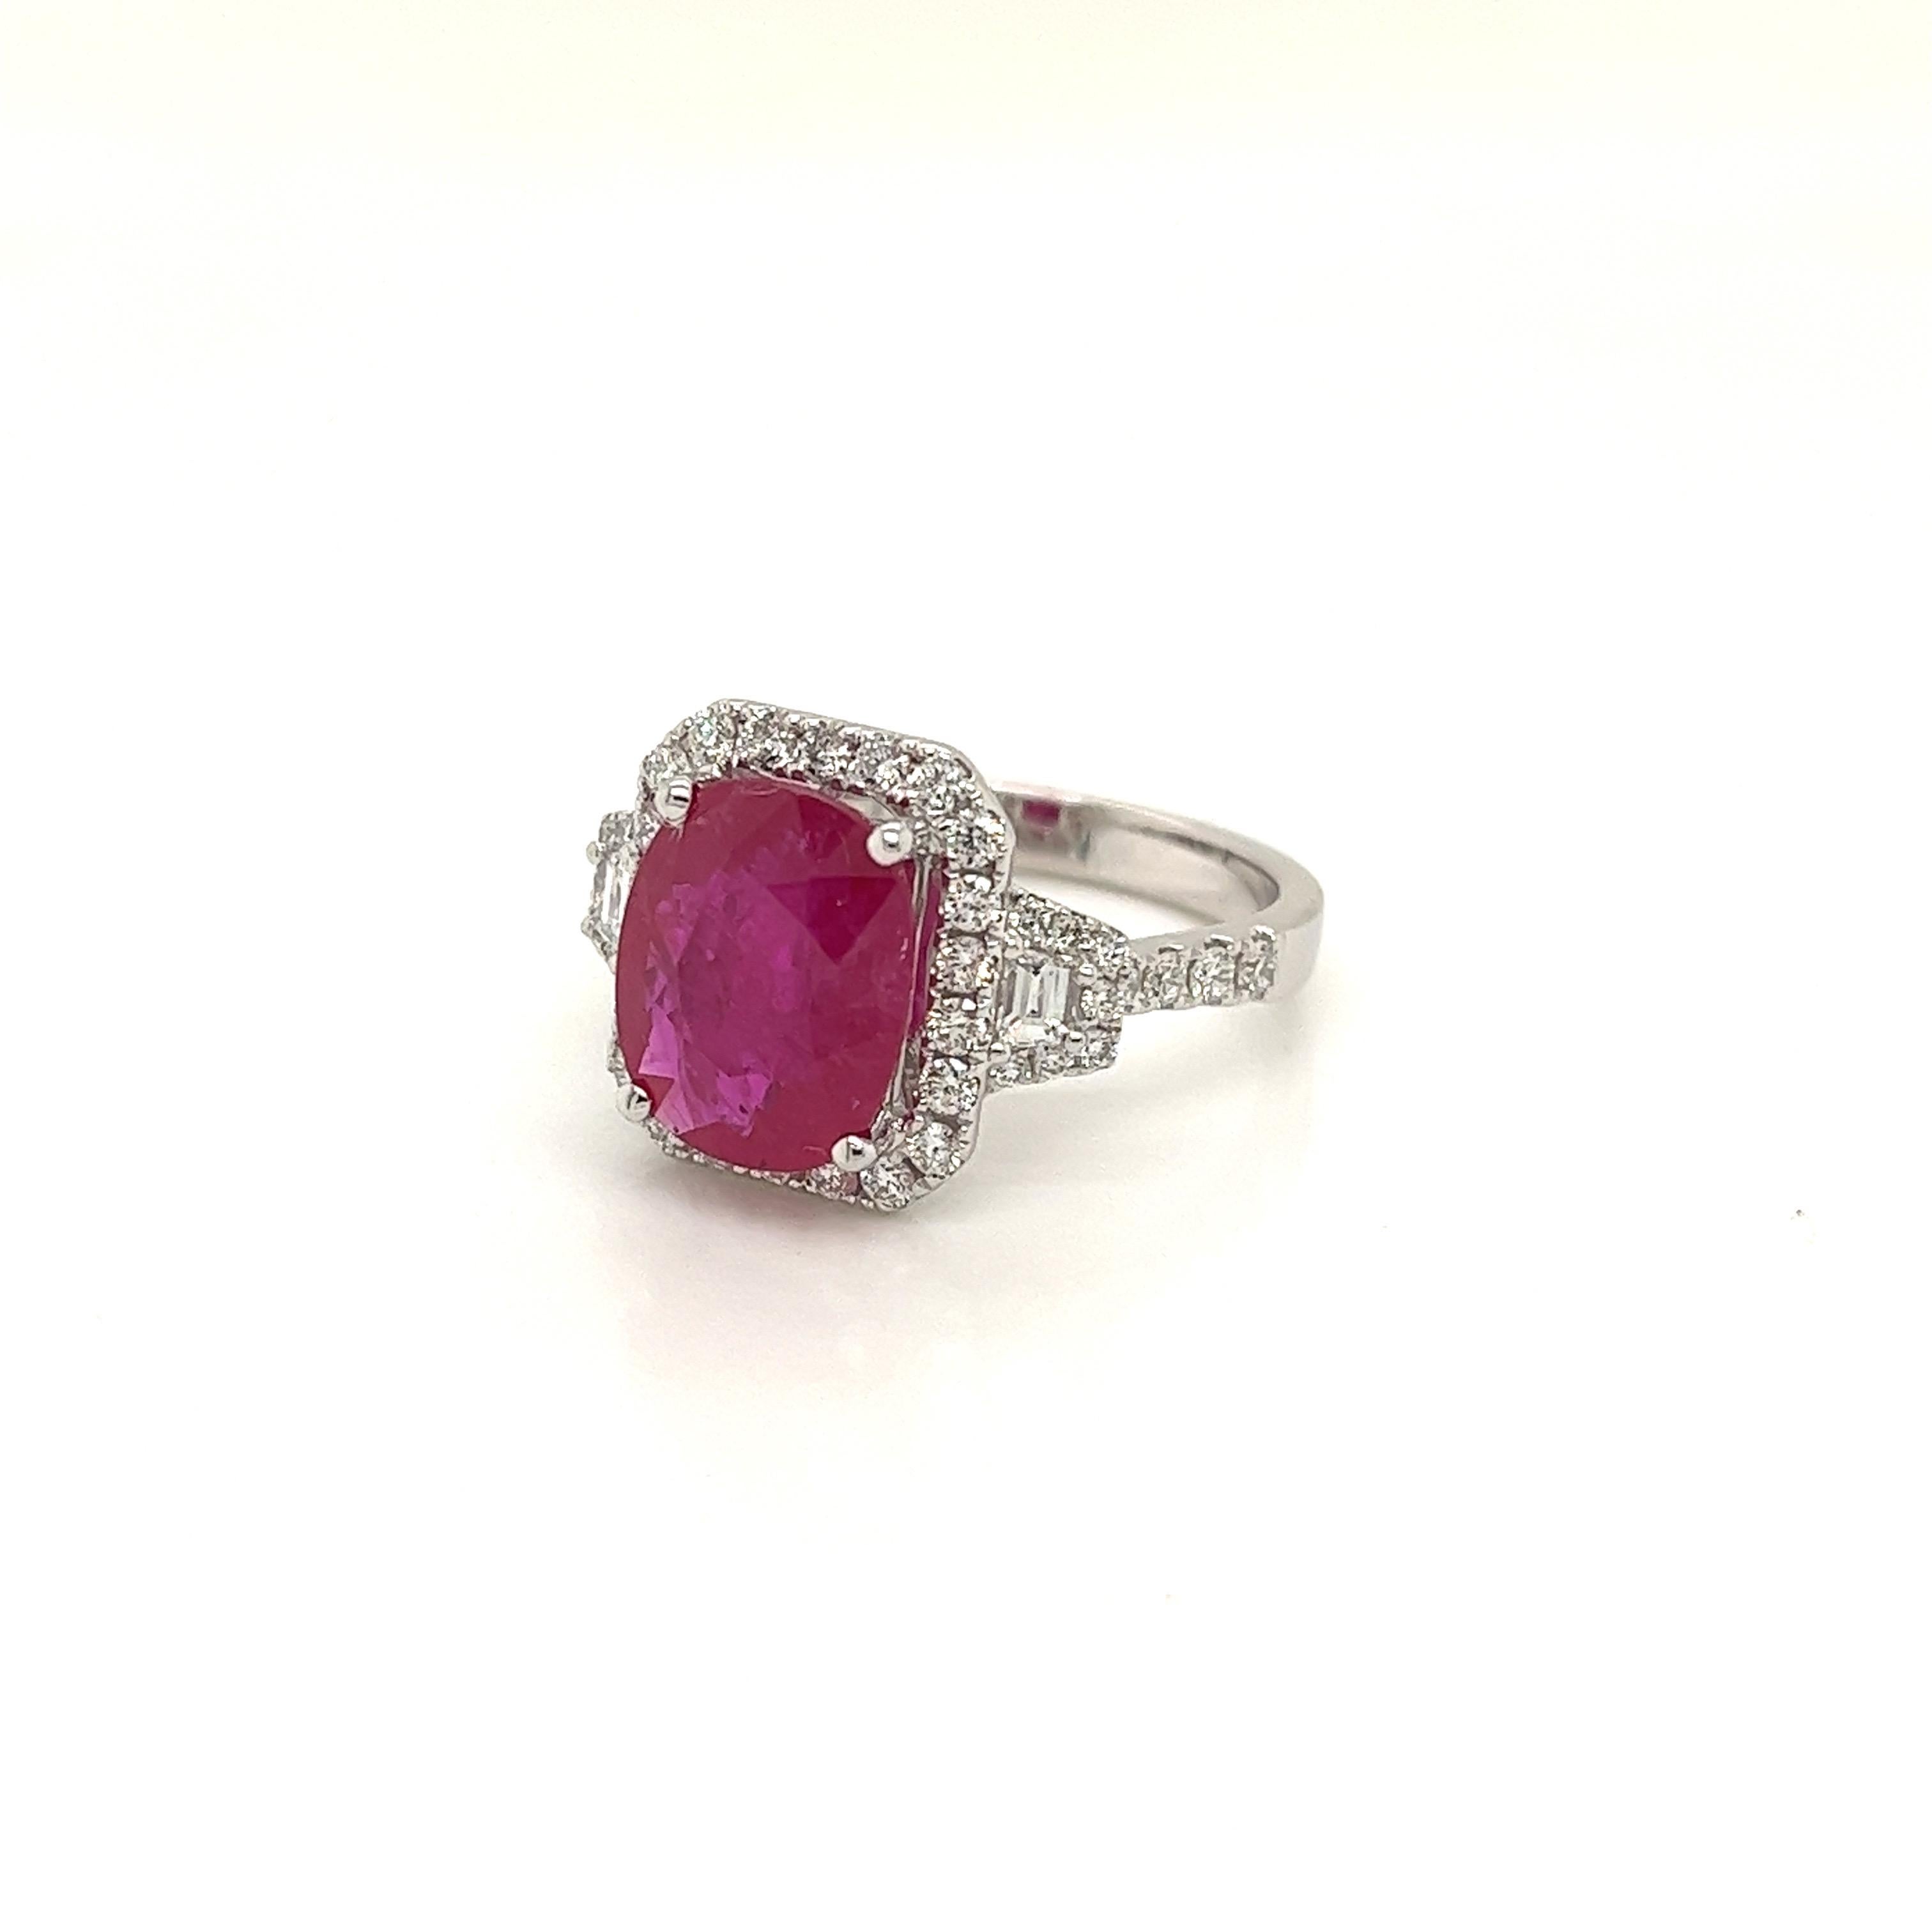 Certified Oval Mozambique Ruby weighing 4.39 carats
Measuring (10.93x9.04x4.78) mm
Diamonds weighing .76 carats
GH-SI1
Set in 18k white gold ring
4.89 g
